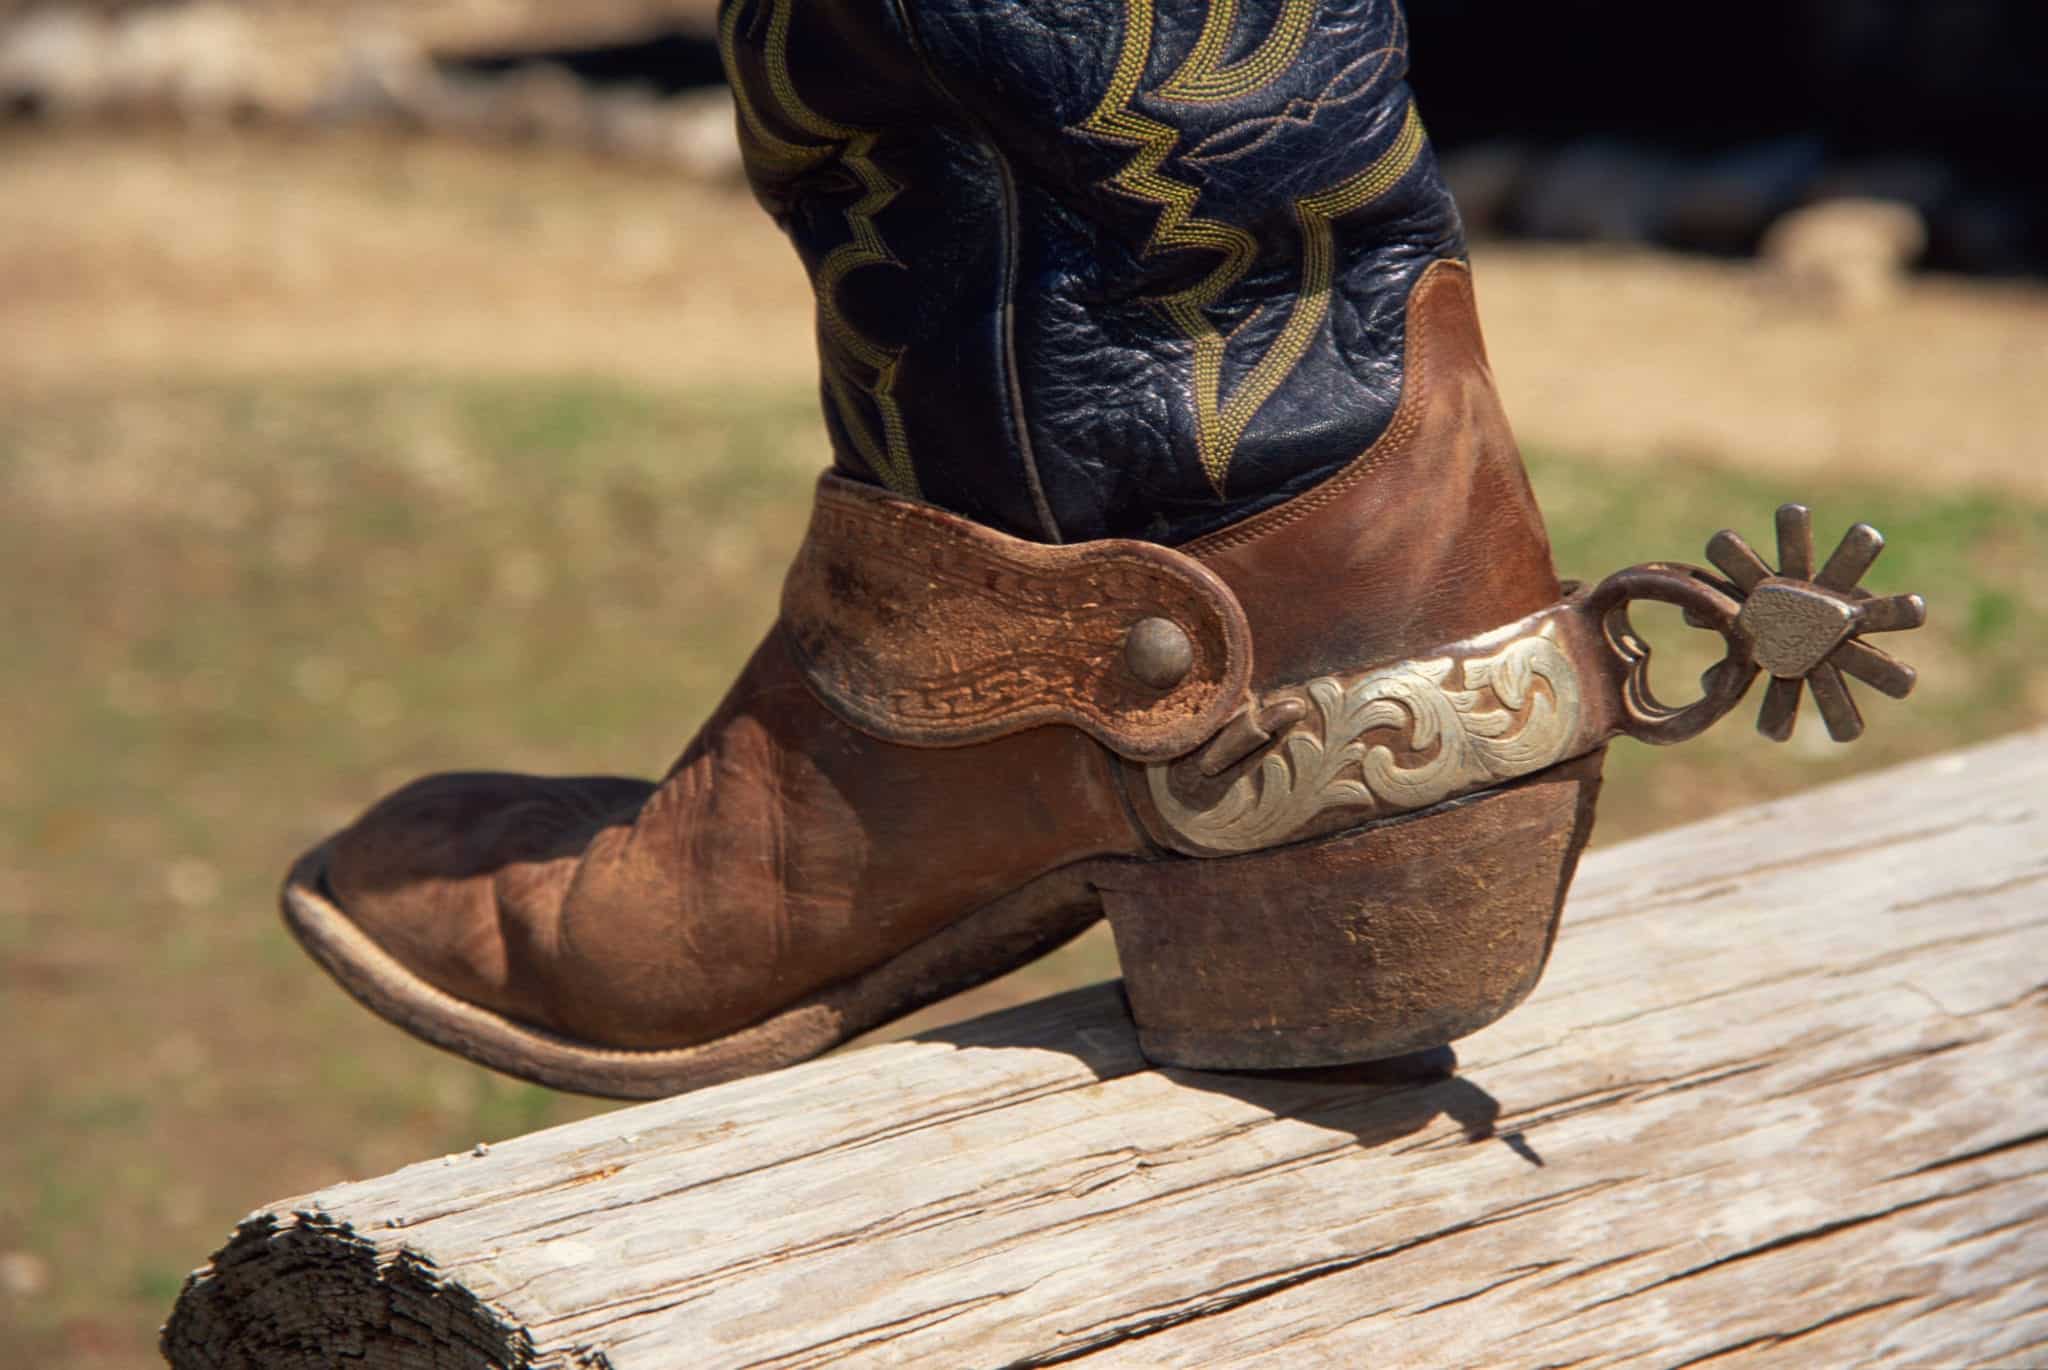 Cowboy boots with spurs